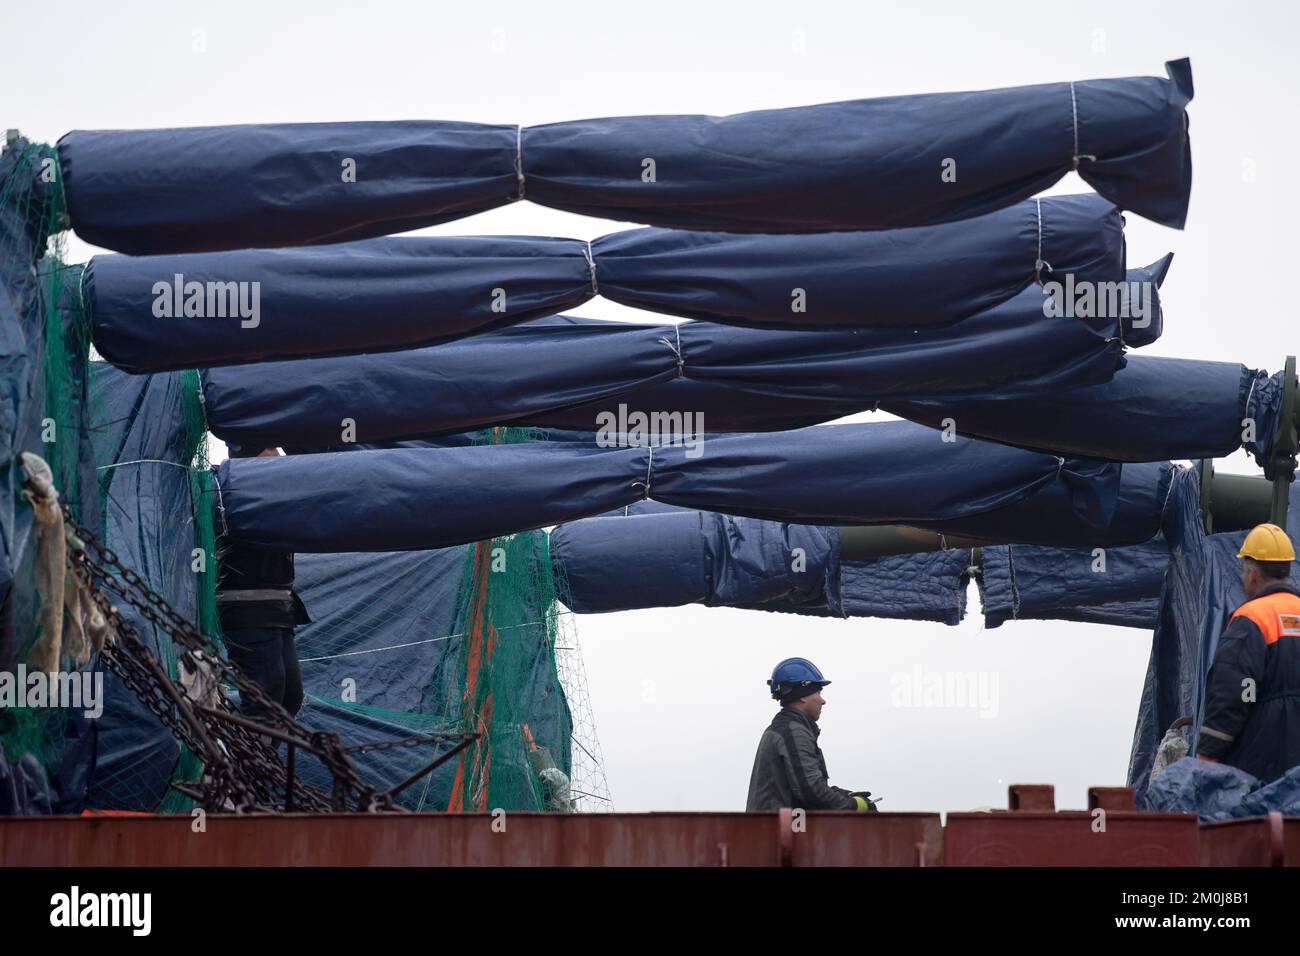 Gdynia, Poland. 6th December 2022. Arrival of the first South Korea`s K9 Thunder gun-howitzers for the Polish Armed Forces © Wojciech Strozyk / Alamy Live News Stock Photo